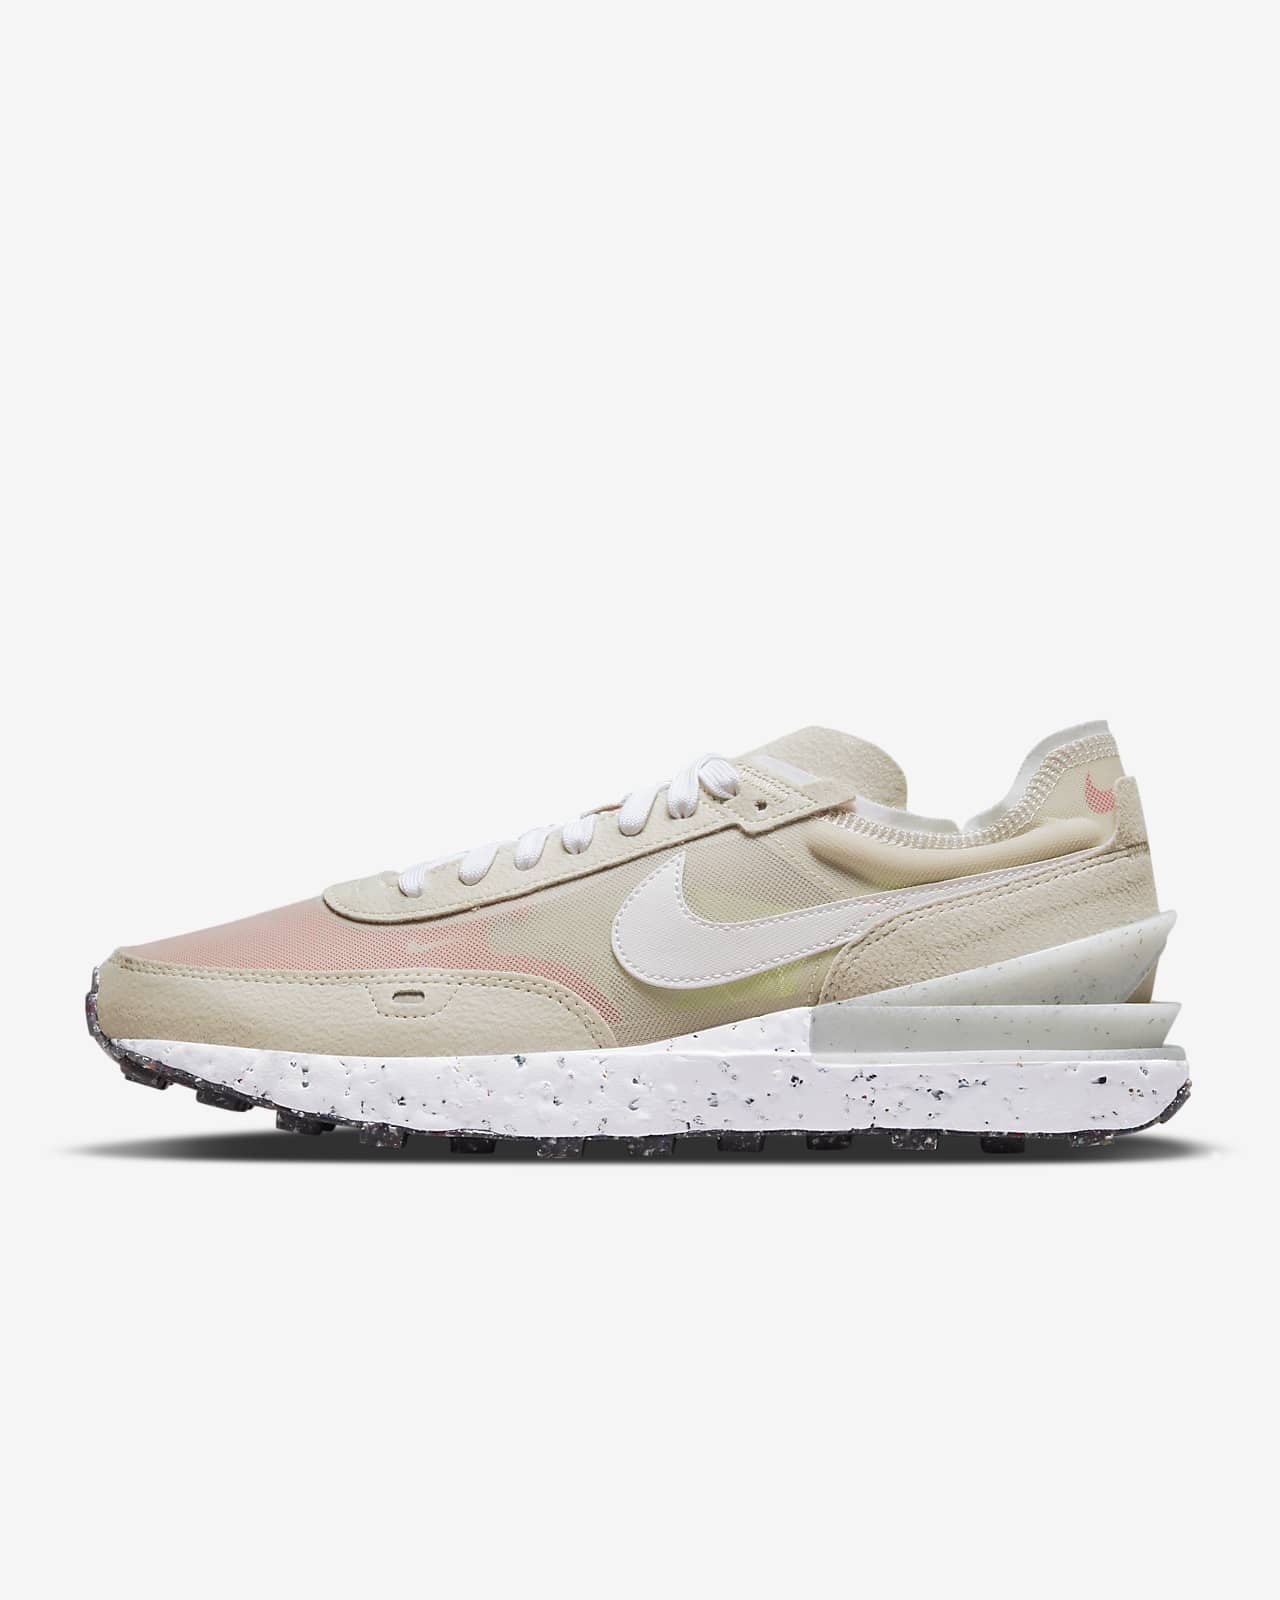 nike waffle one crater